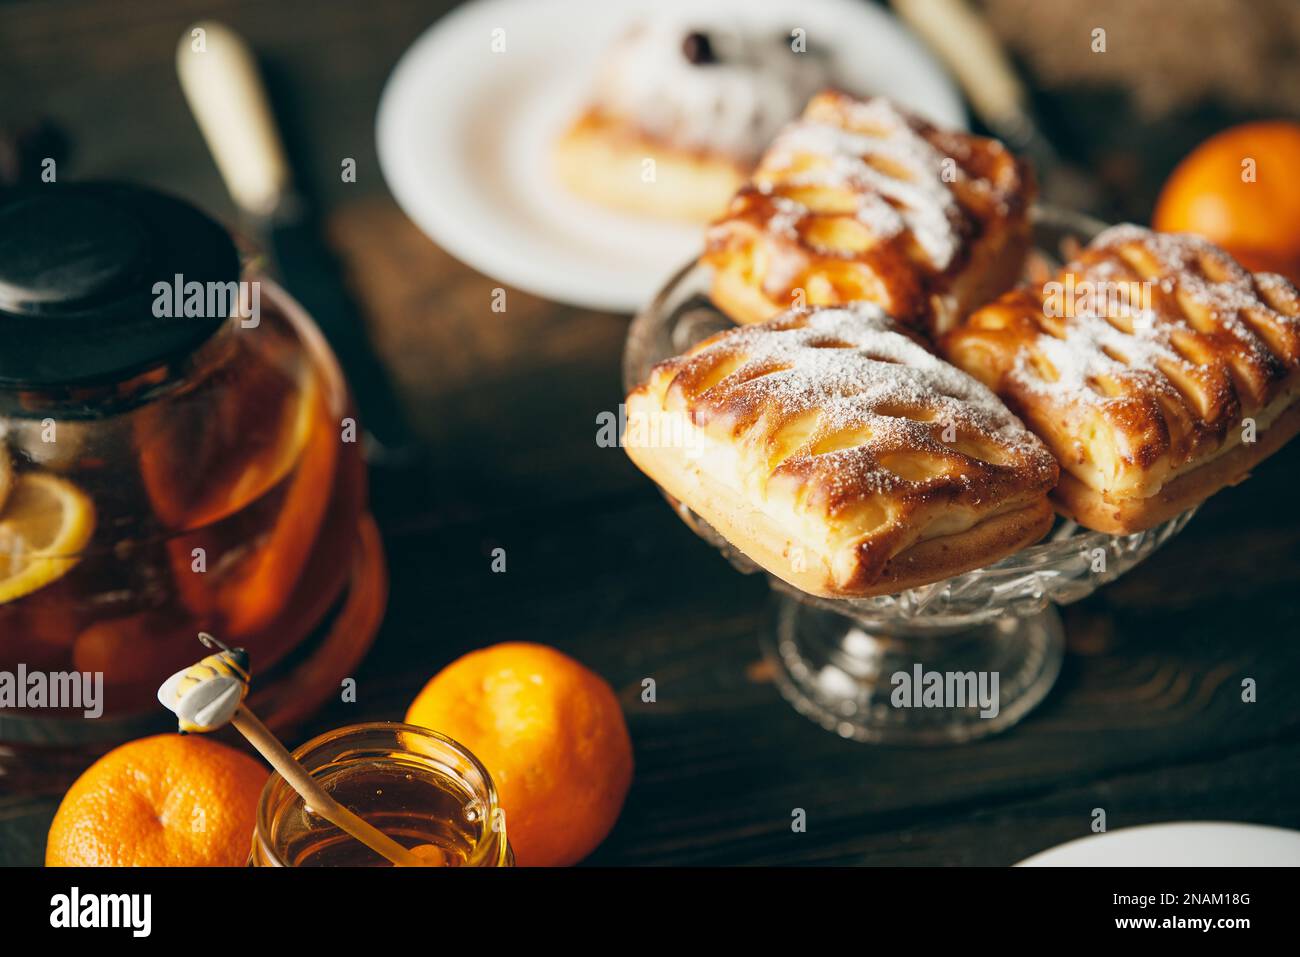 Homemade pastries on beautifully served table decorated in rustic style. Cozy home, tea time, food background Stock Photo